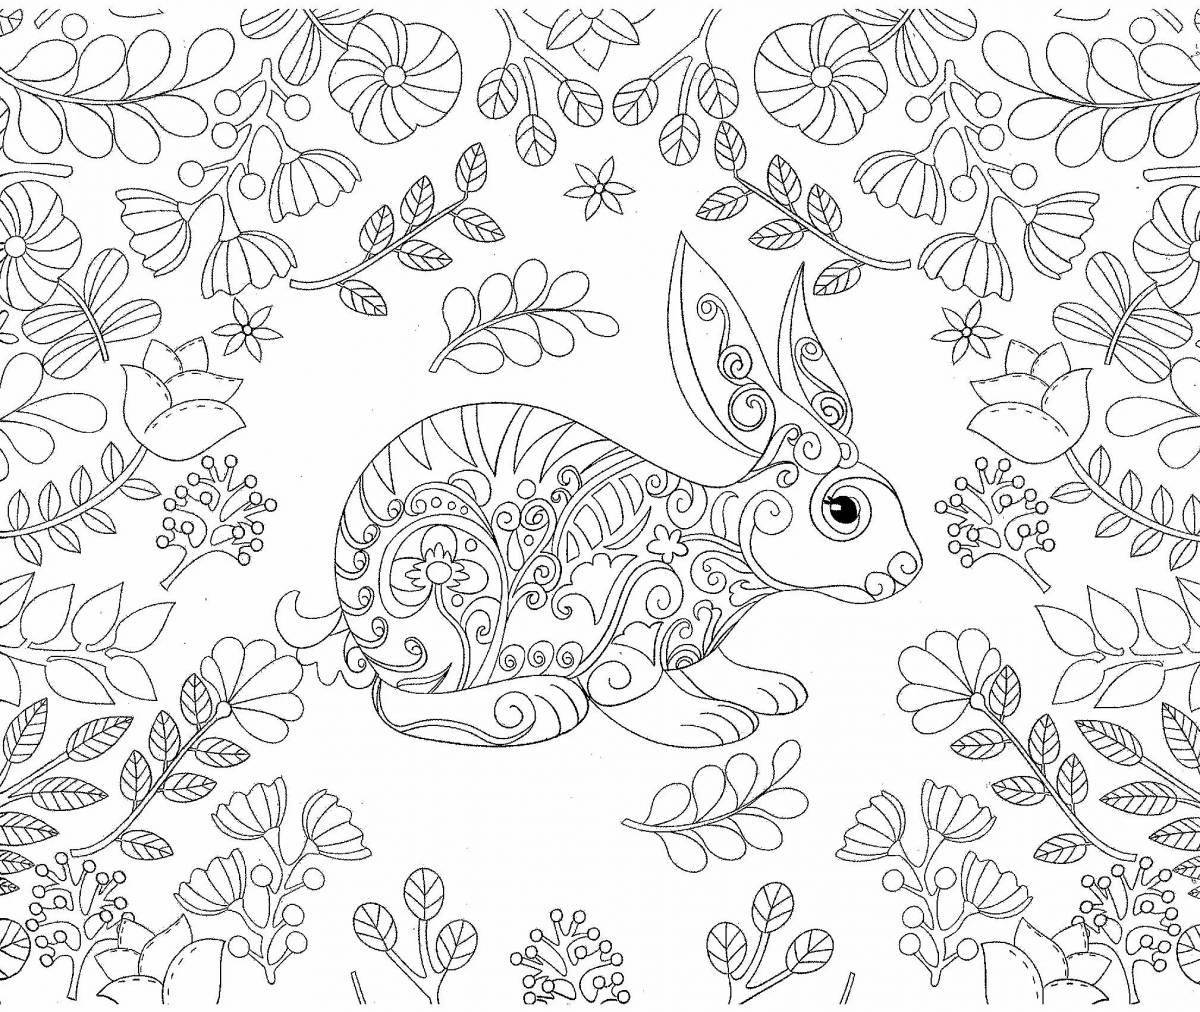 Soulful anti-stress coloring hare